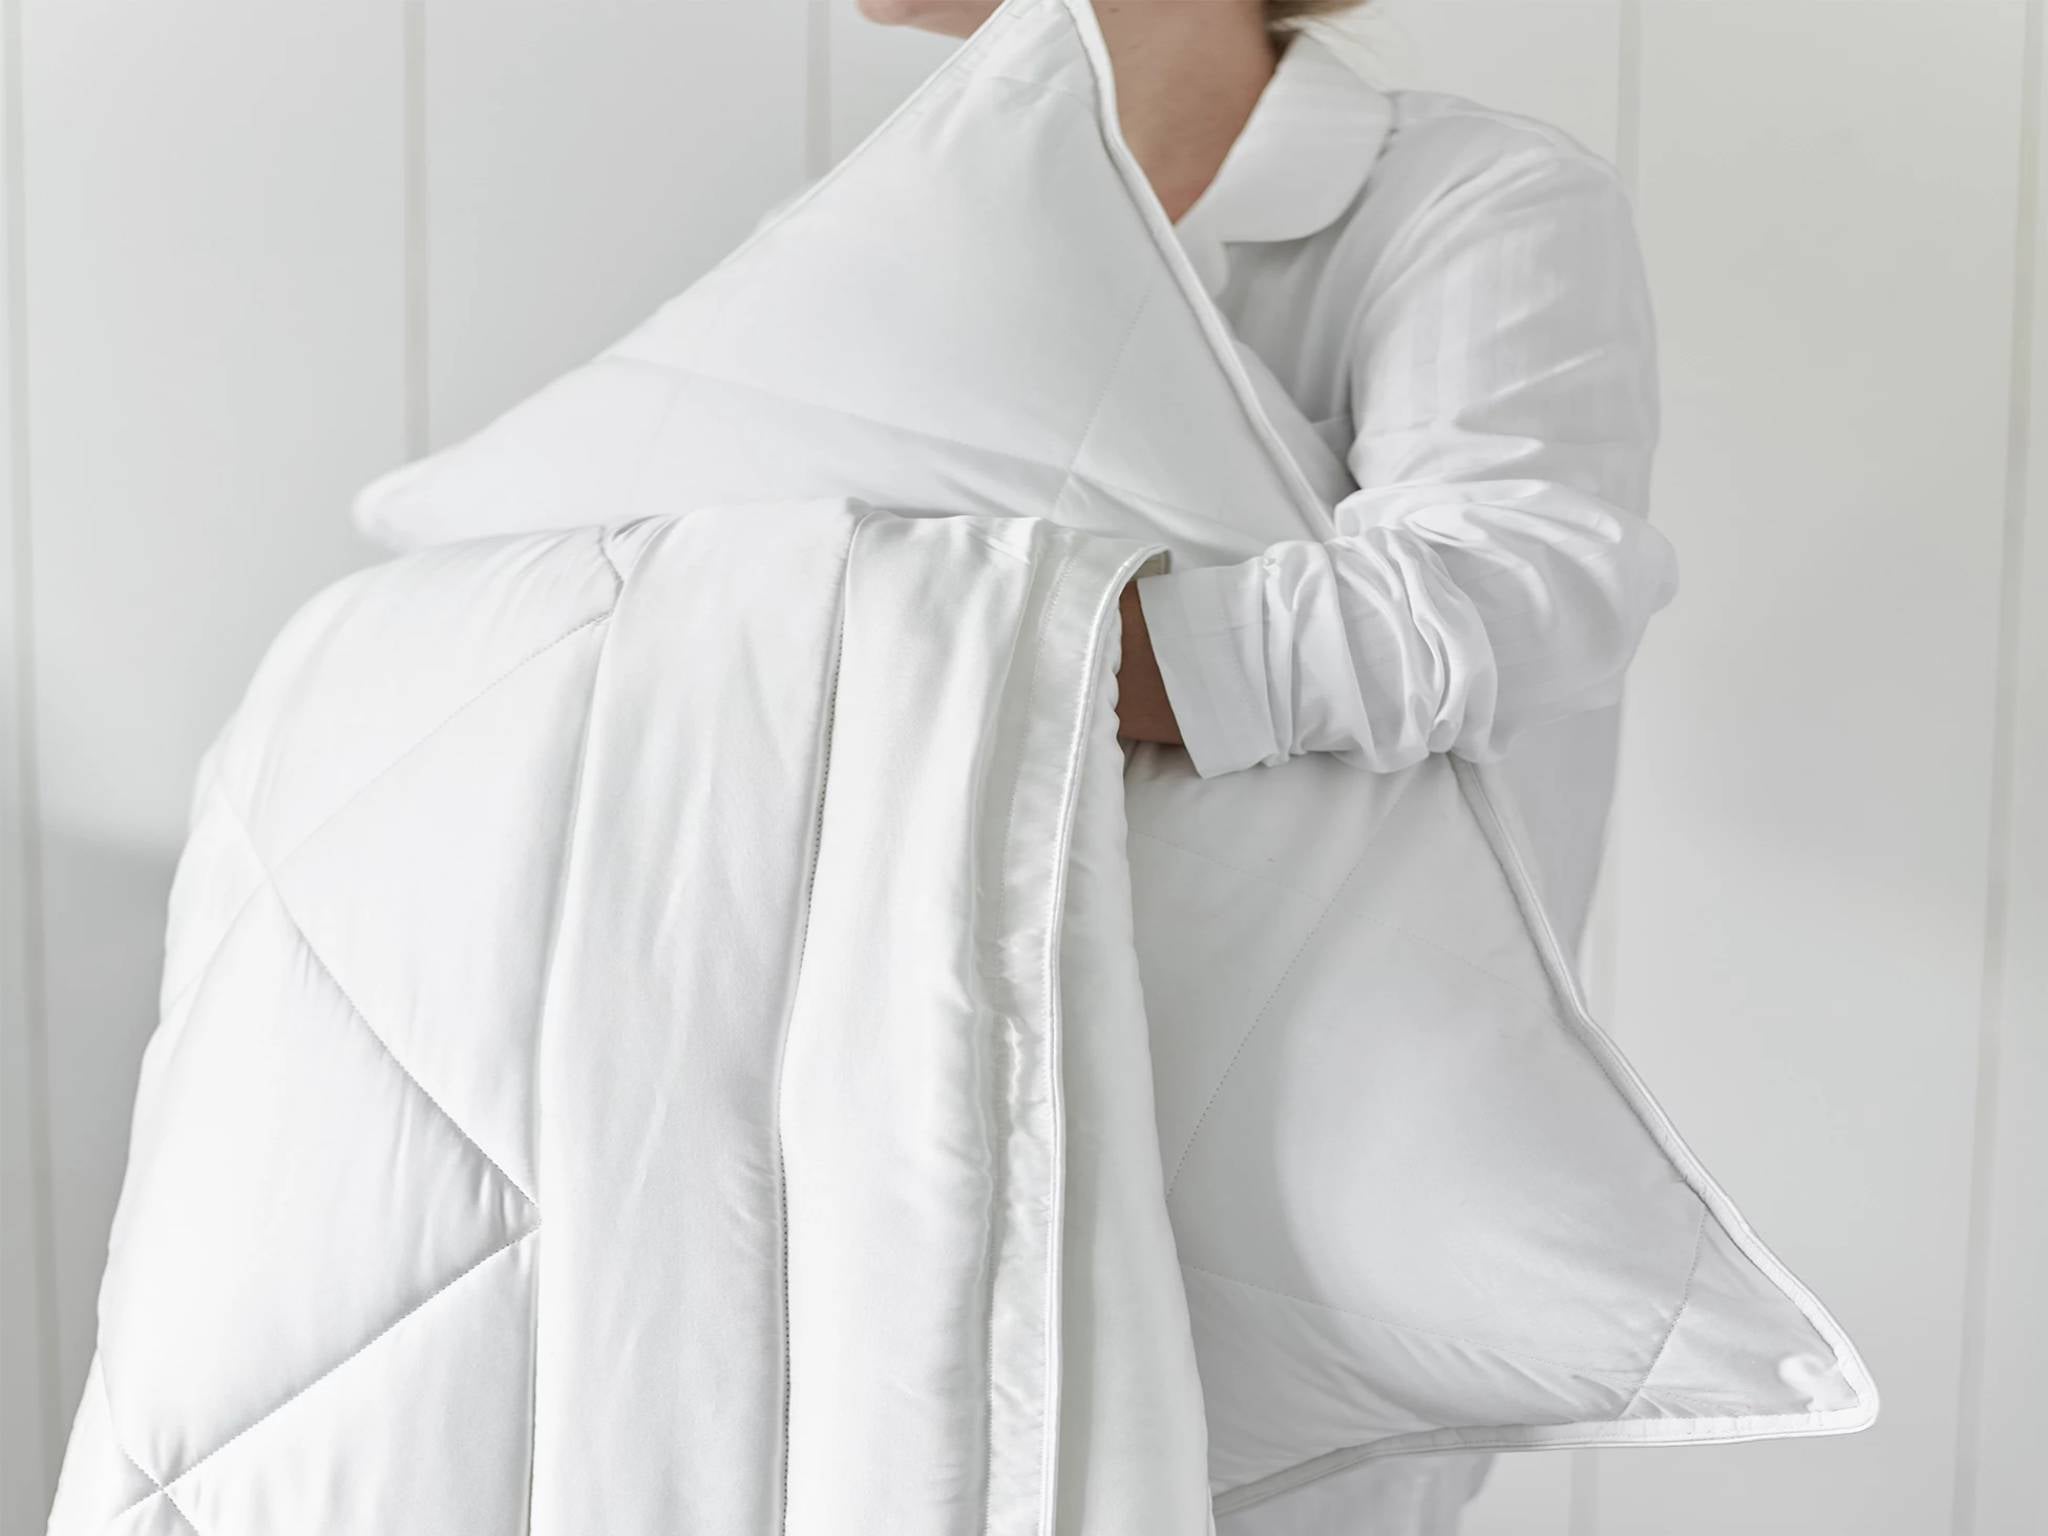 The White Company ultimate silk surround pillow: From £85, The White Company